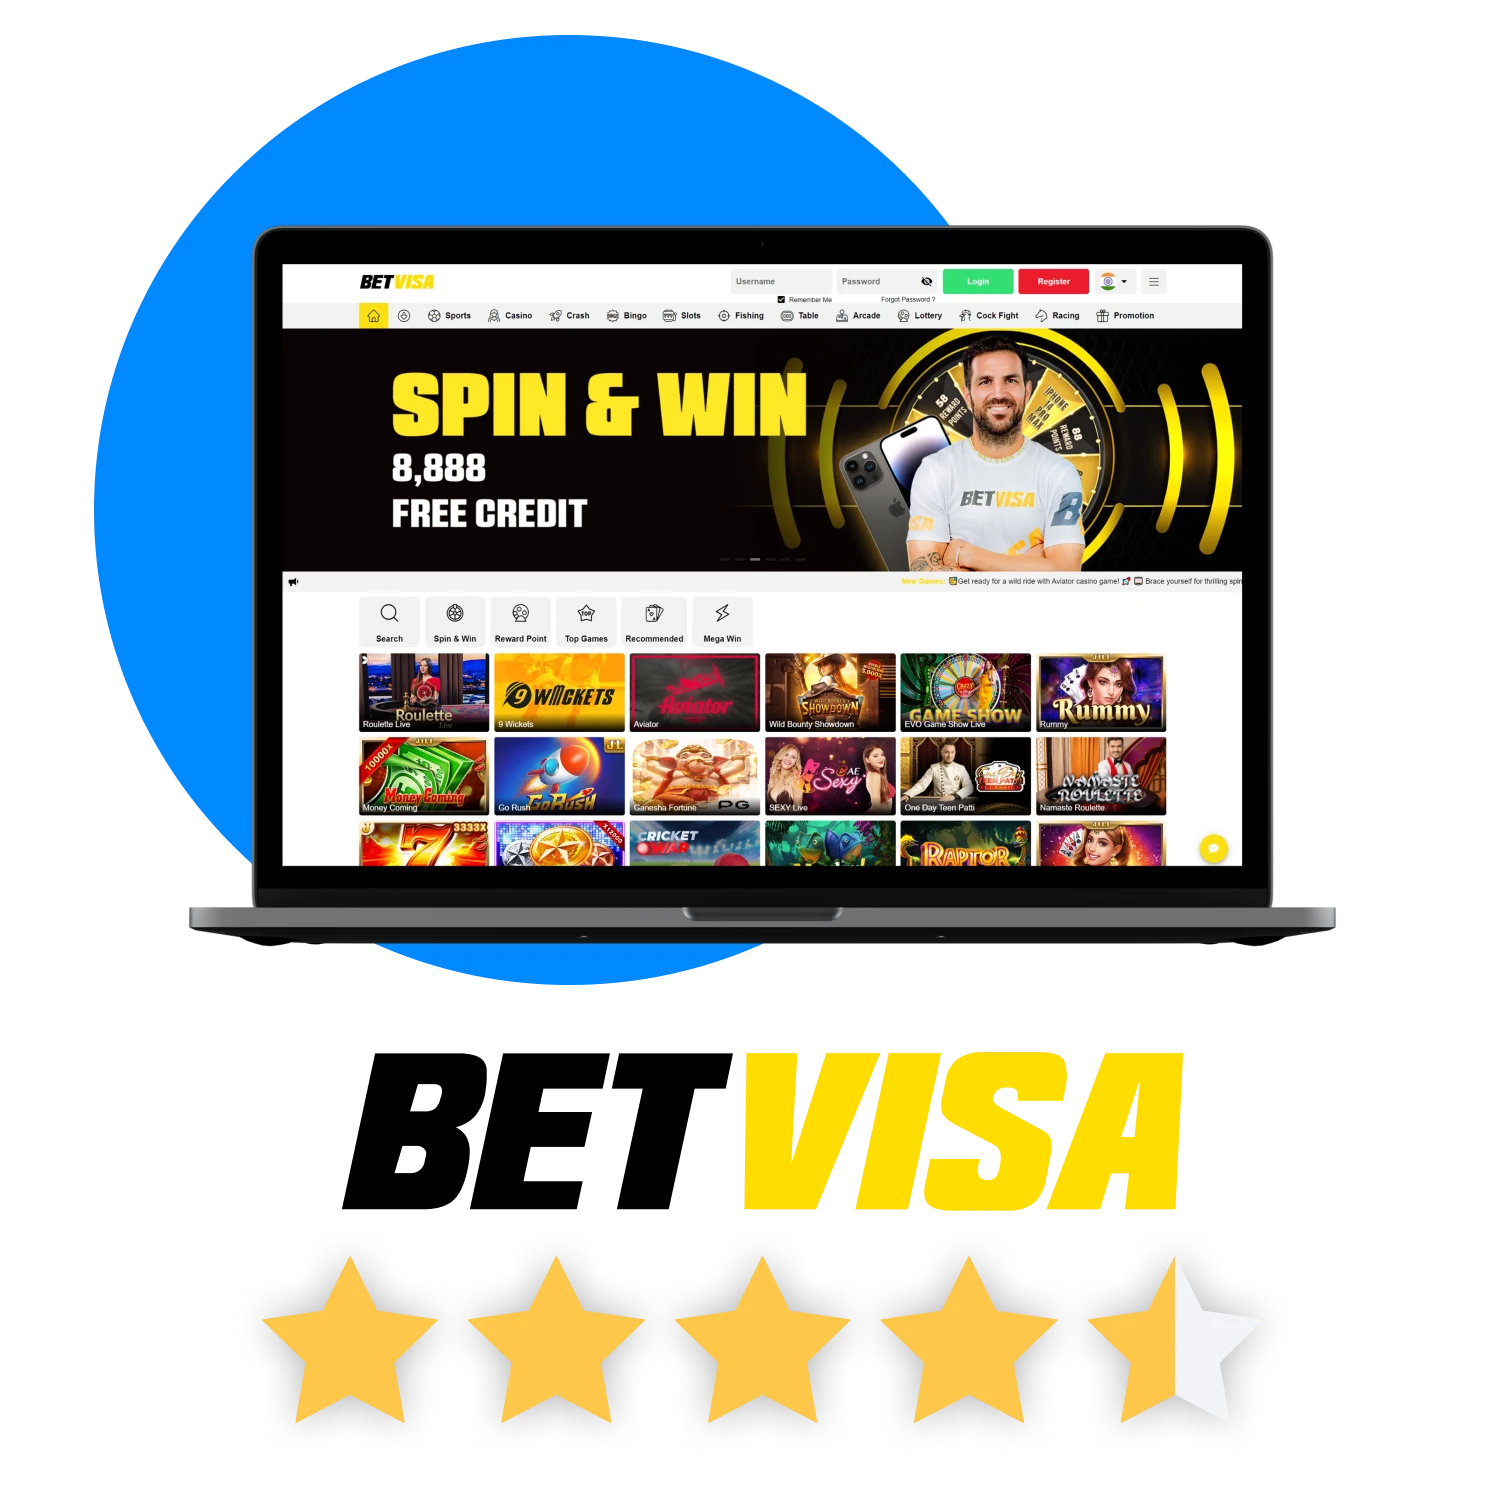 Find out what other players are saying about Betvisa.